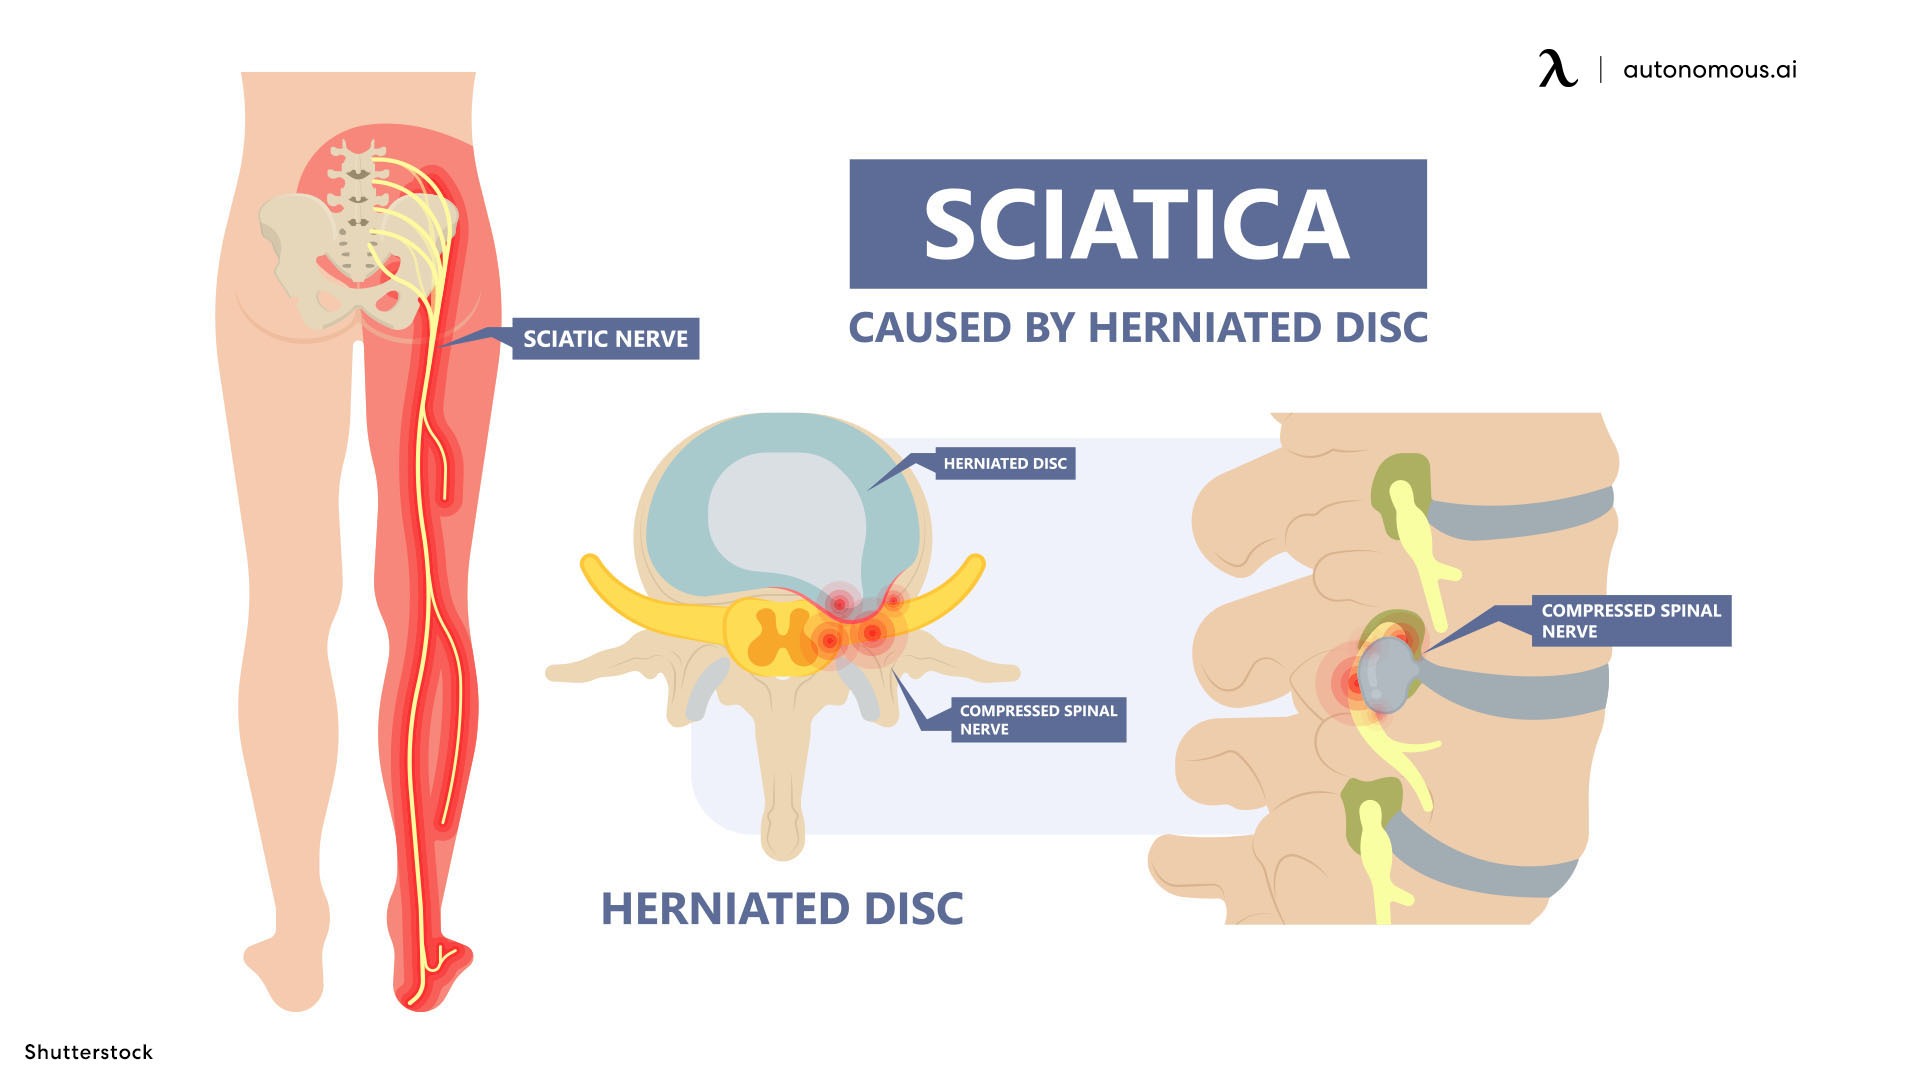 What is Sciatica Pain?